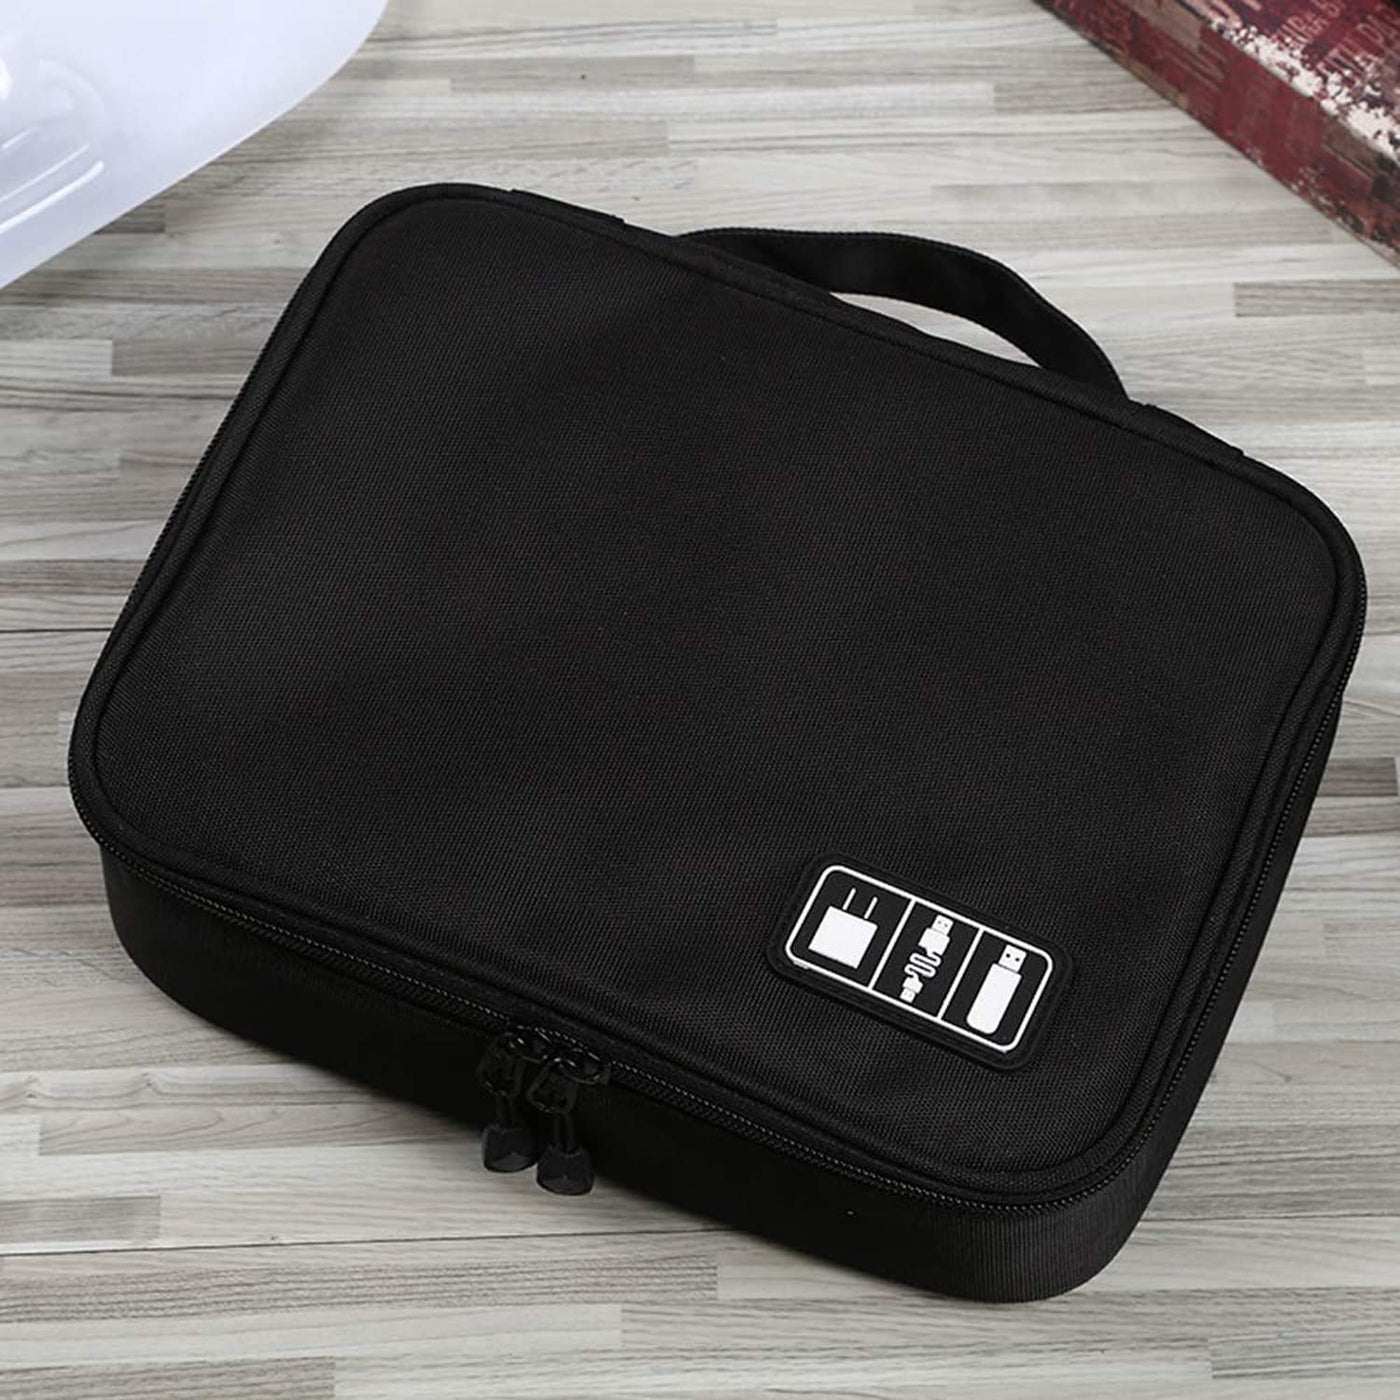 Electronics Accessories Organizer Bag, Universal Carry Travel Gadget Bag for Cables, Plug and More, Perfect Size Fits for Pad Phone Charger